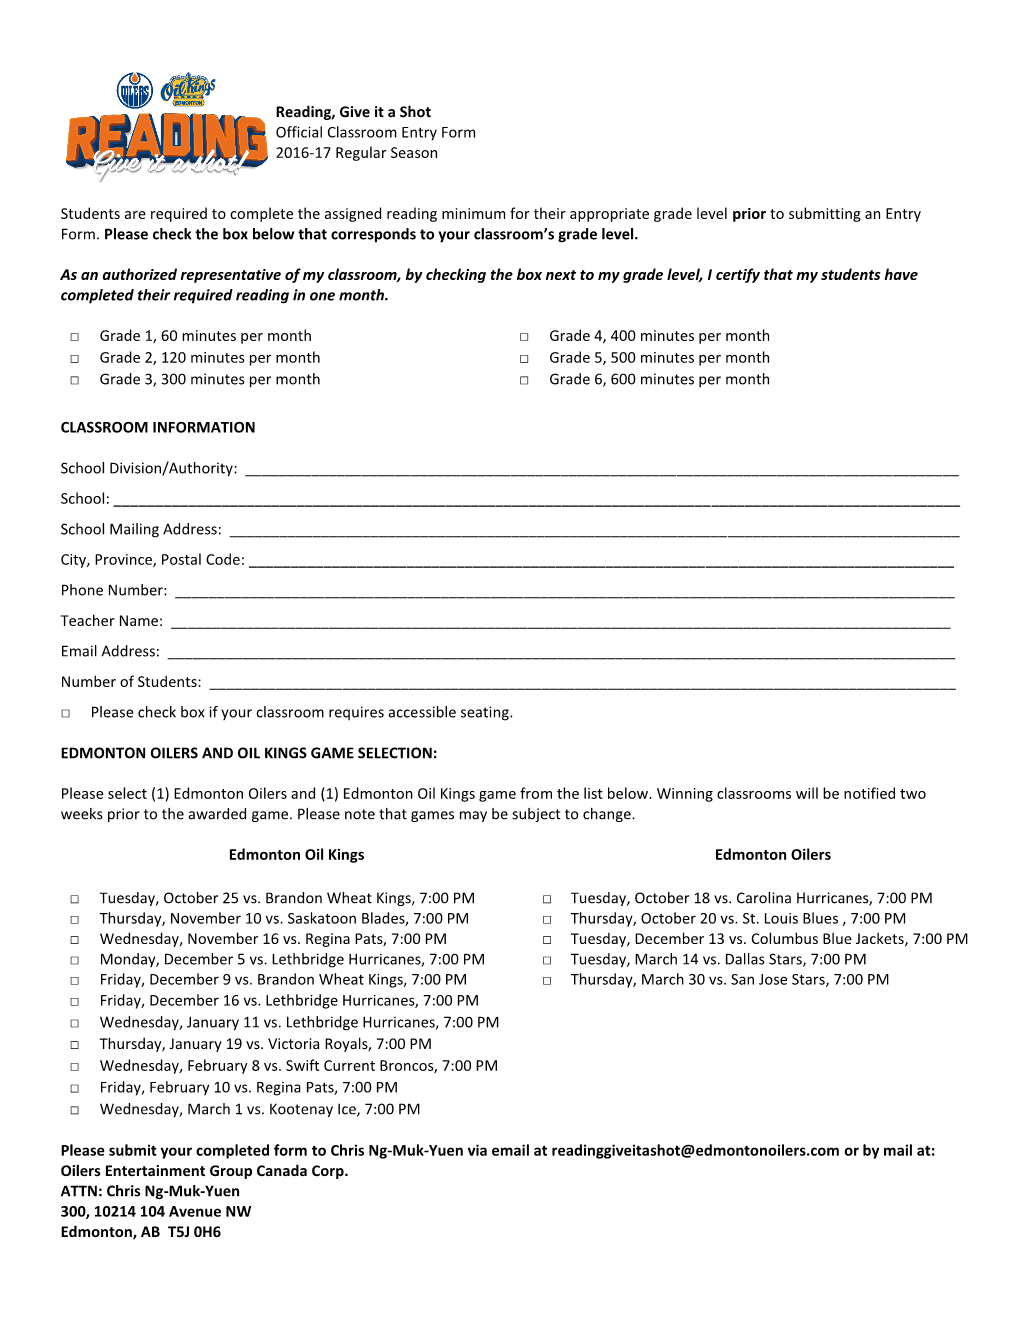 Reading, Give It a Shot Official Classroom Entry Form 2016-17 Regular Season